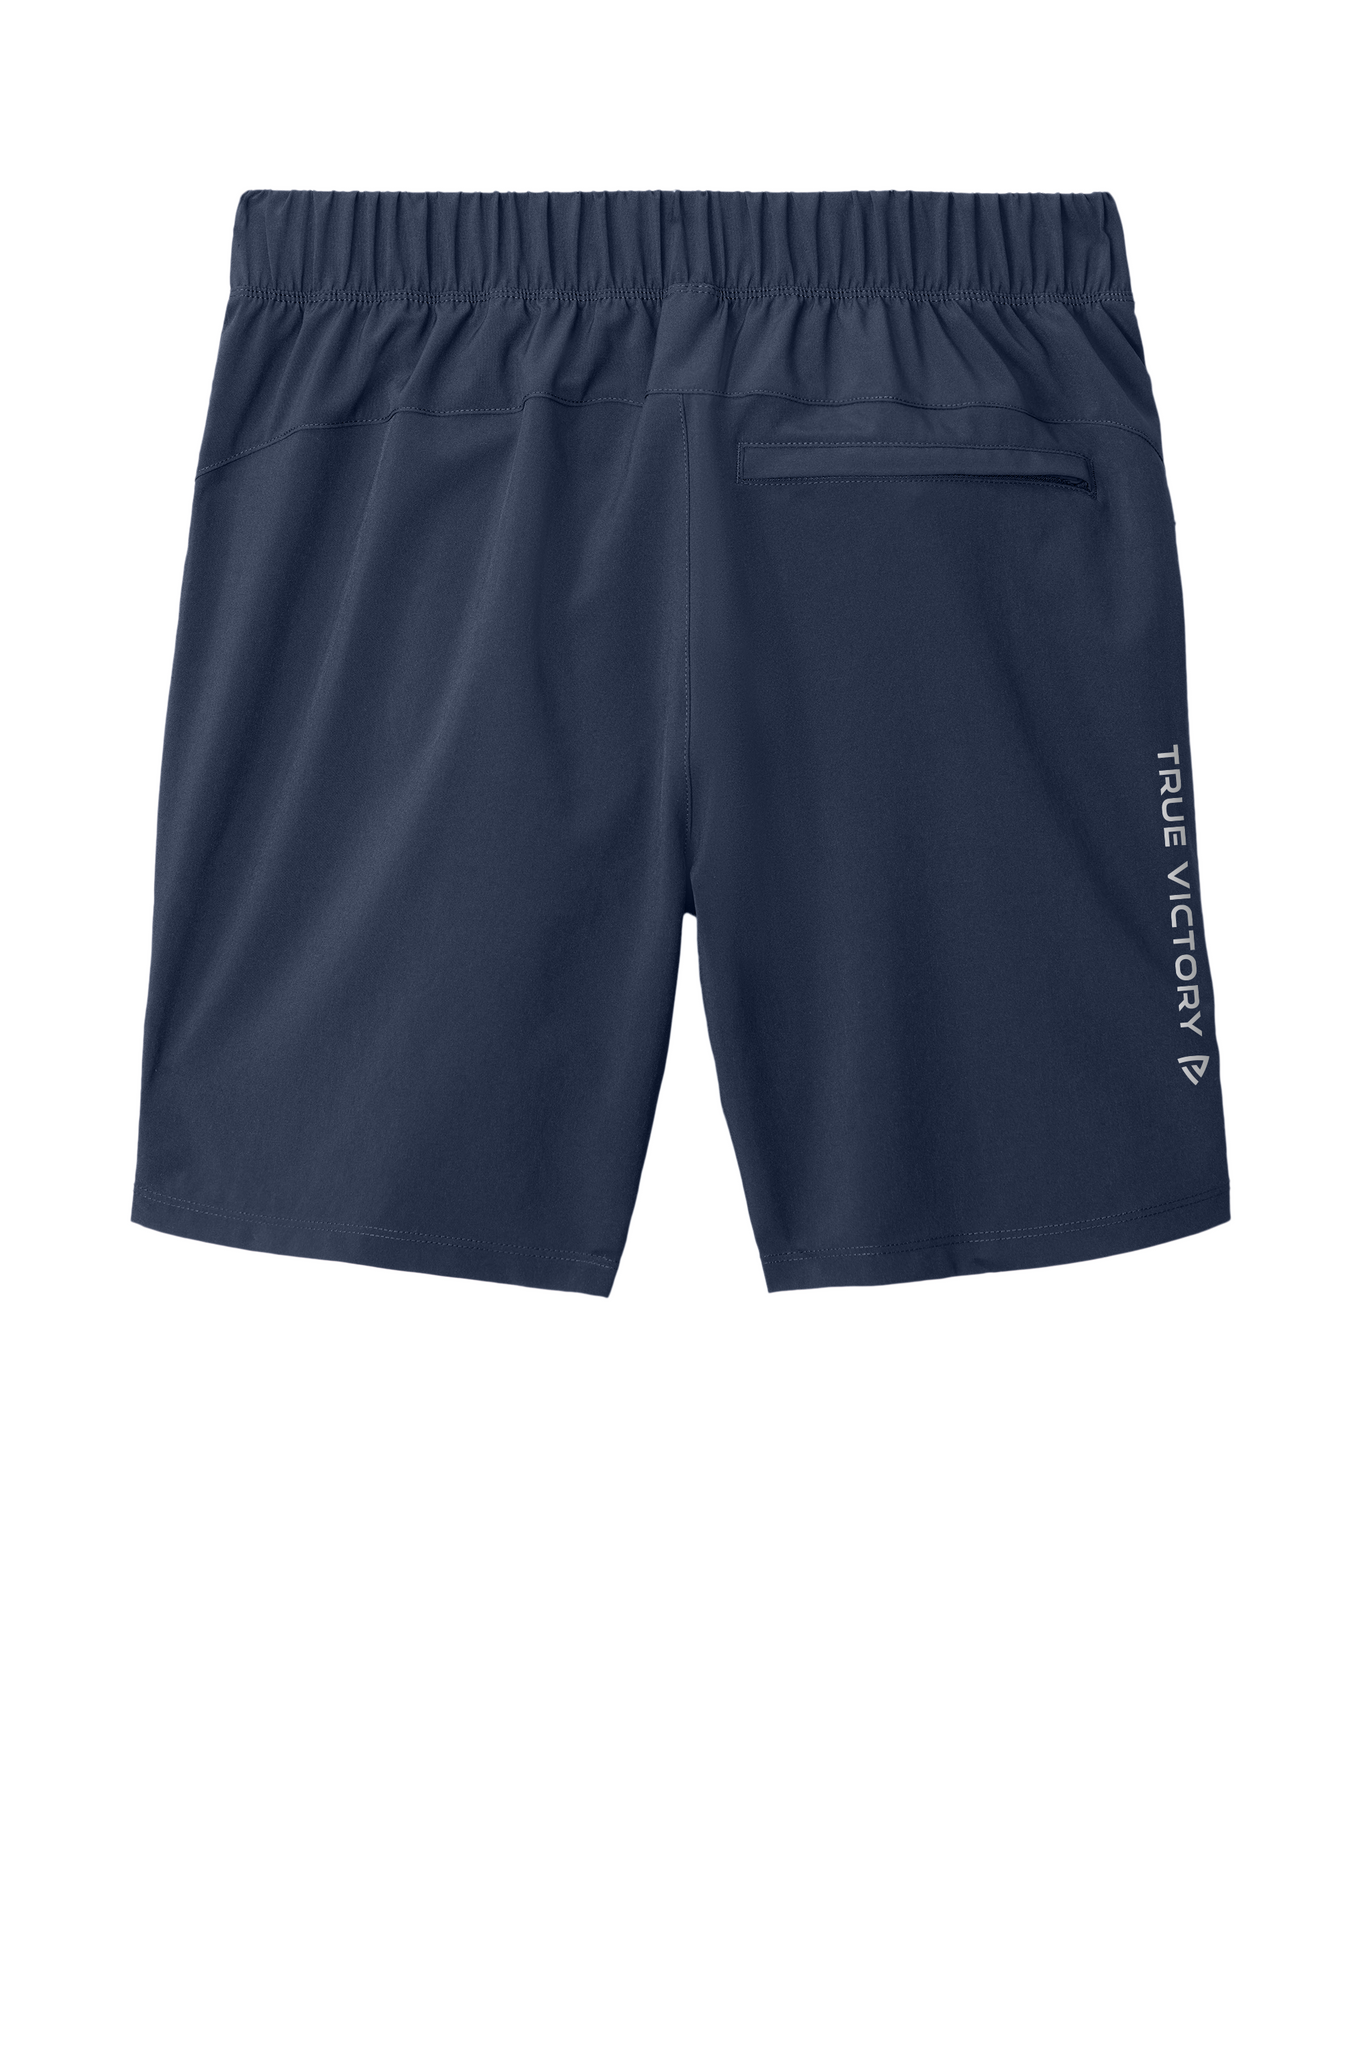 Victorious 7 Performance Shorts